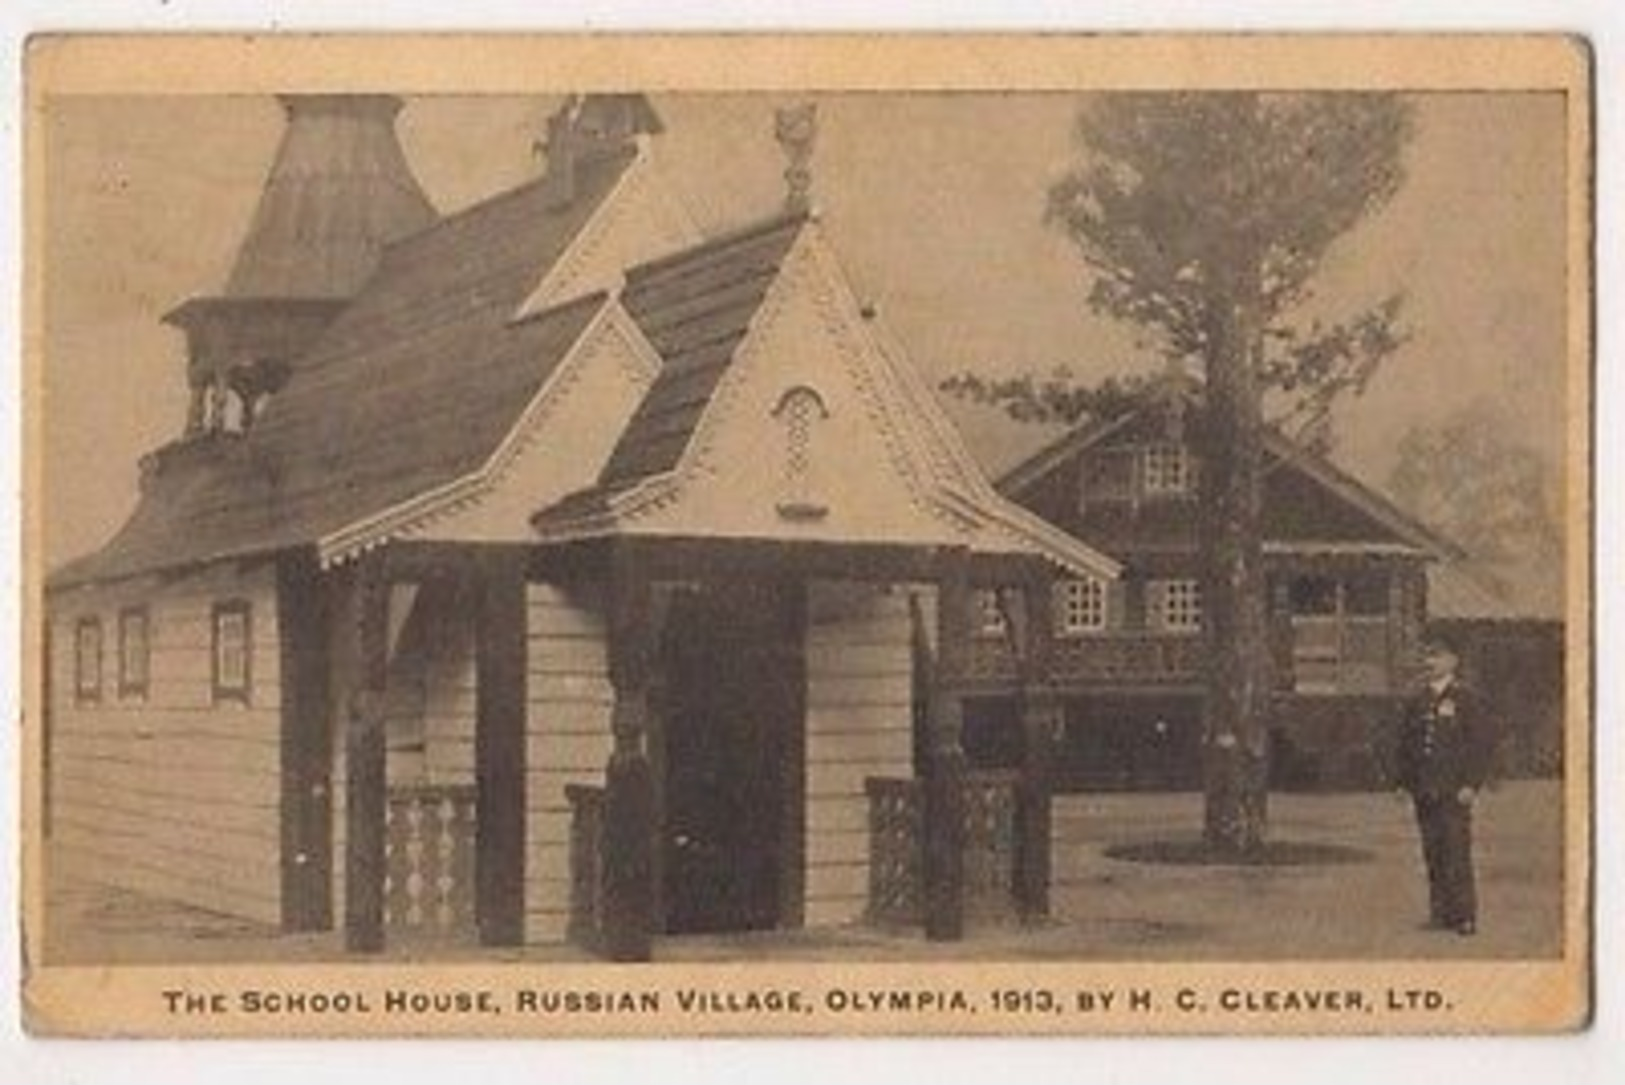 School House Russia Village Olympia 1913 H.C. Cleaver Advert Postcard B717 - Expositions